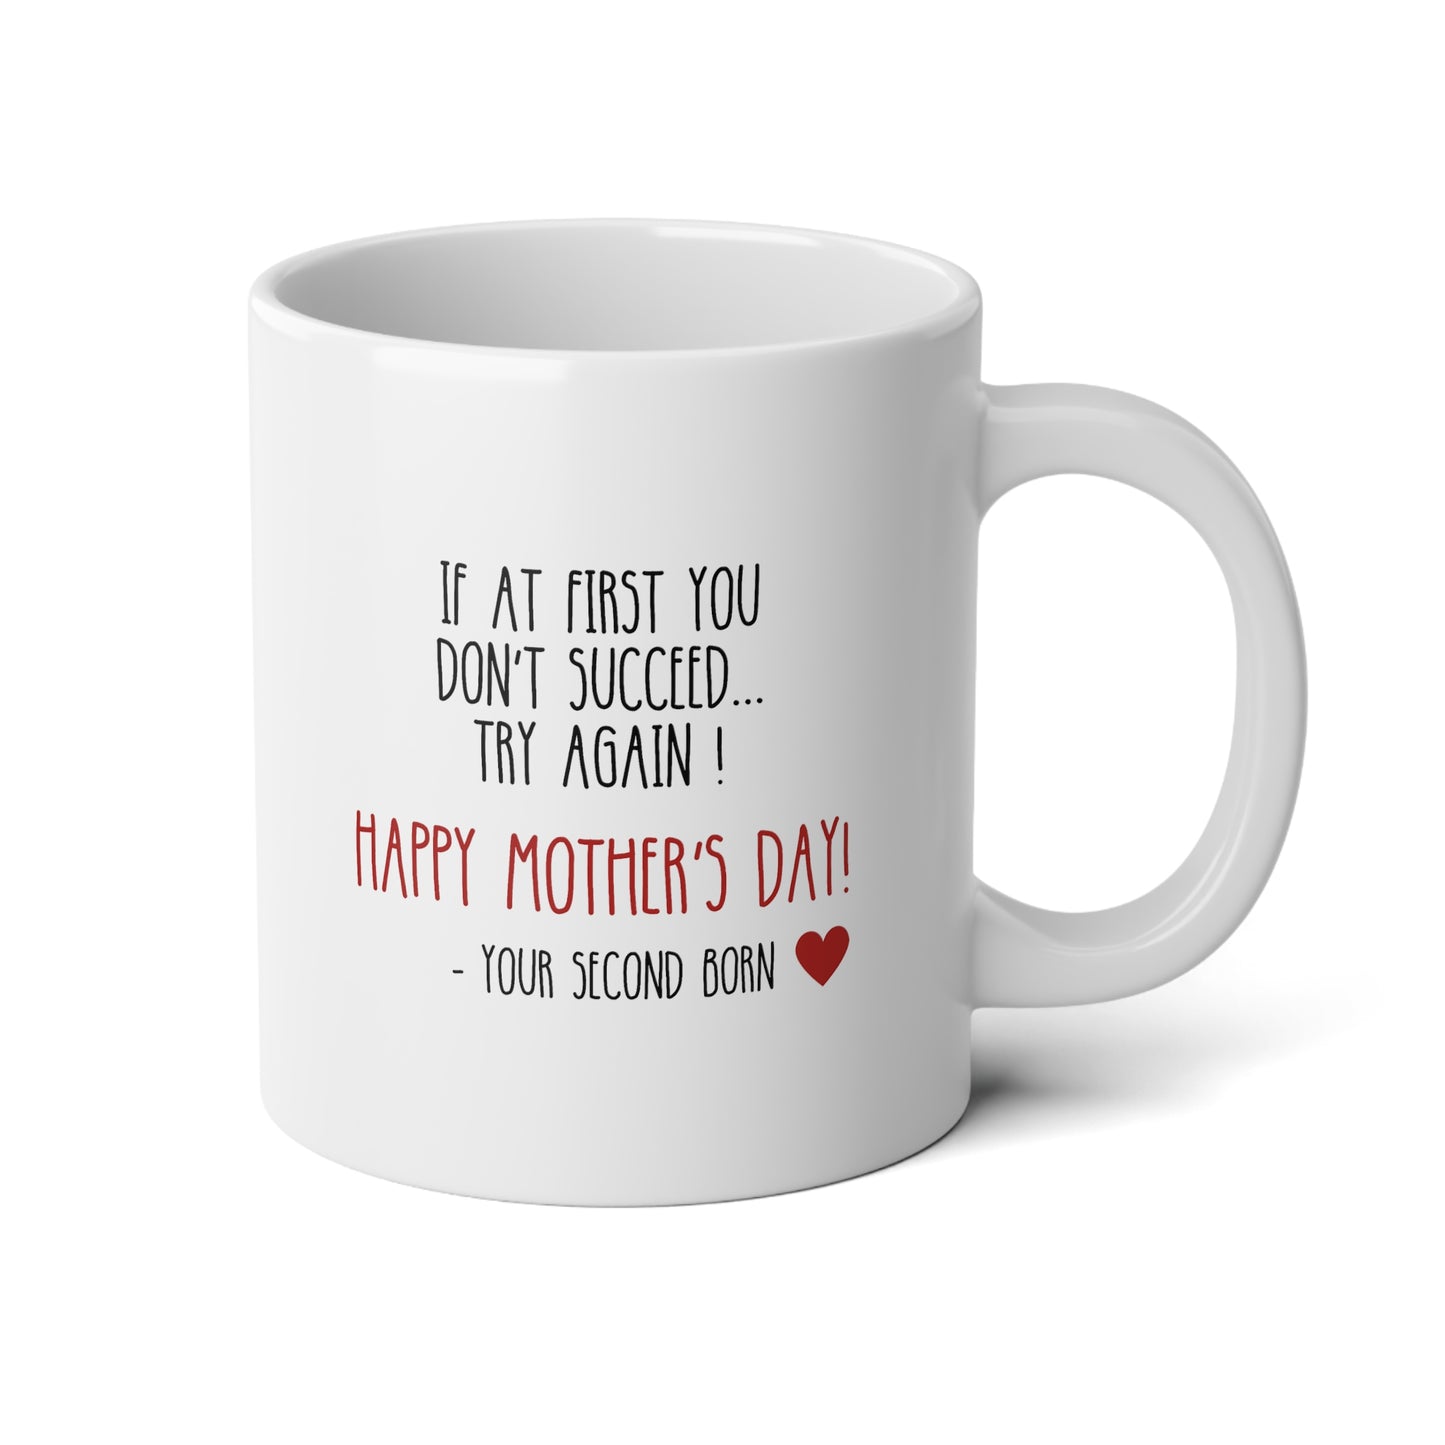 If At First You Don't Succeed Try Again 20oz white funny large coffee mug gift for mother's day second born child sibling mom her waveywares wavey wares wavywares wavy wares